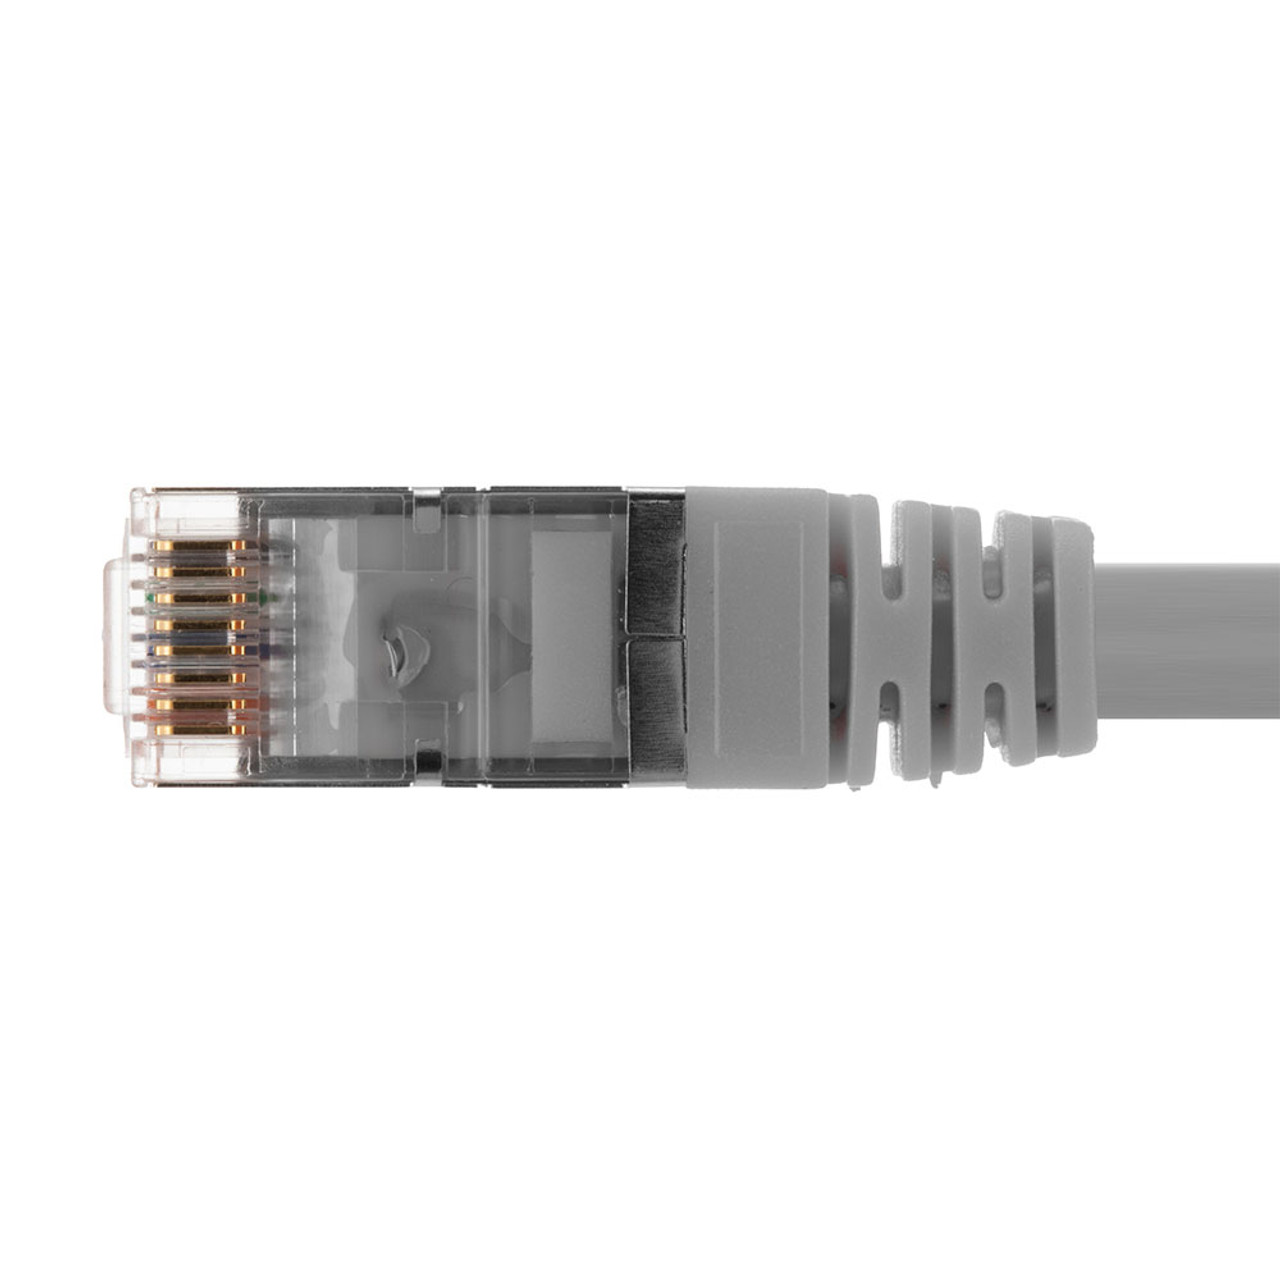 Ethernet Patch Cable CAT6, F/UTP, 26AWG, 3 Ft,  5 pack, Gray